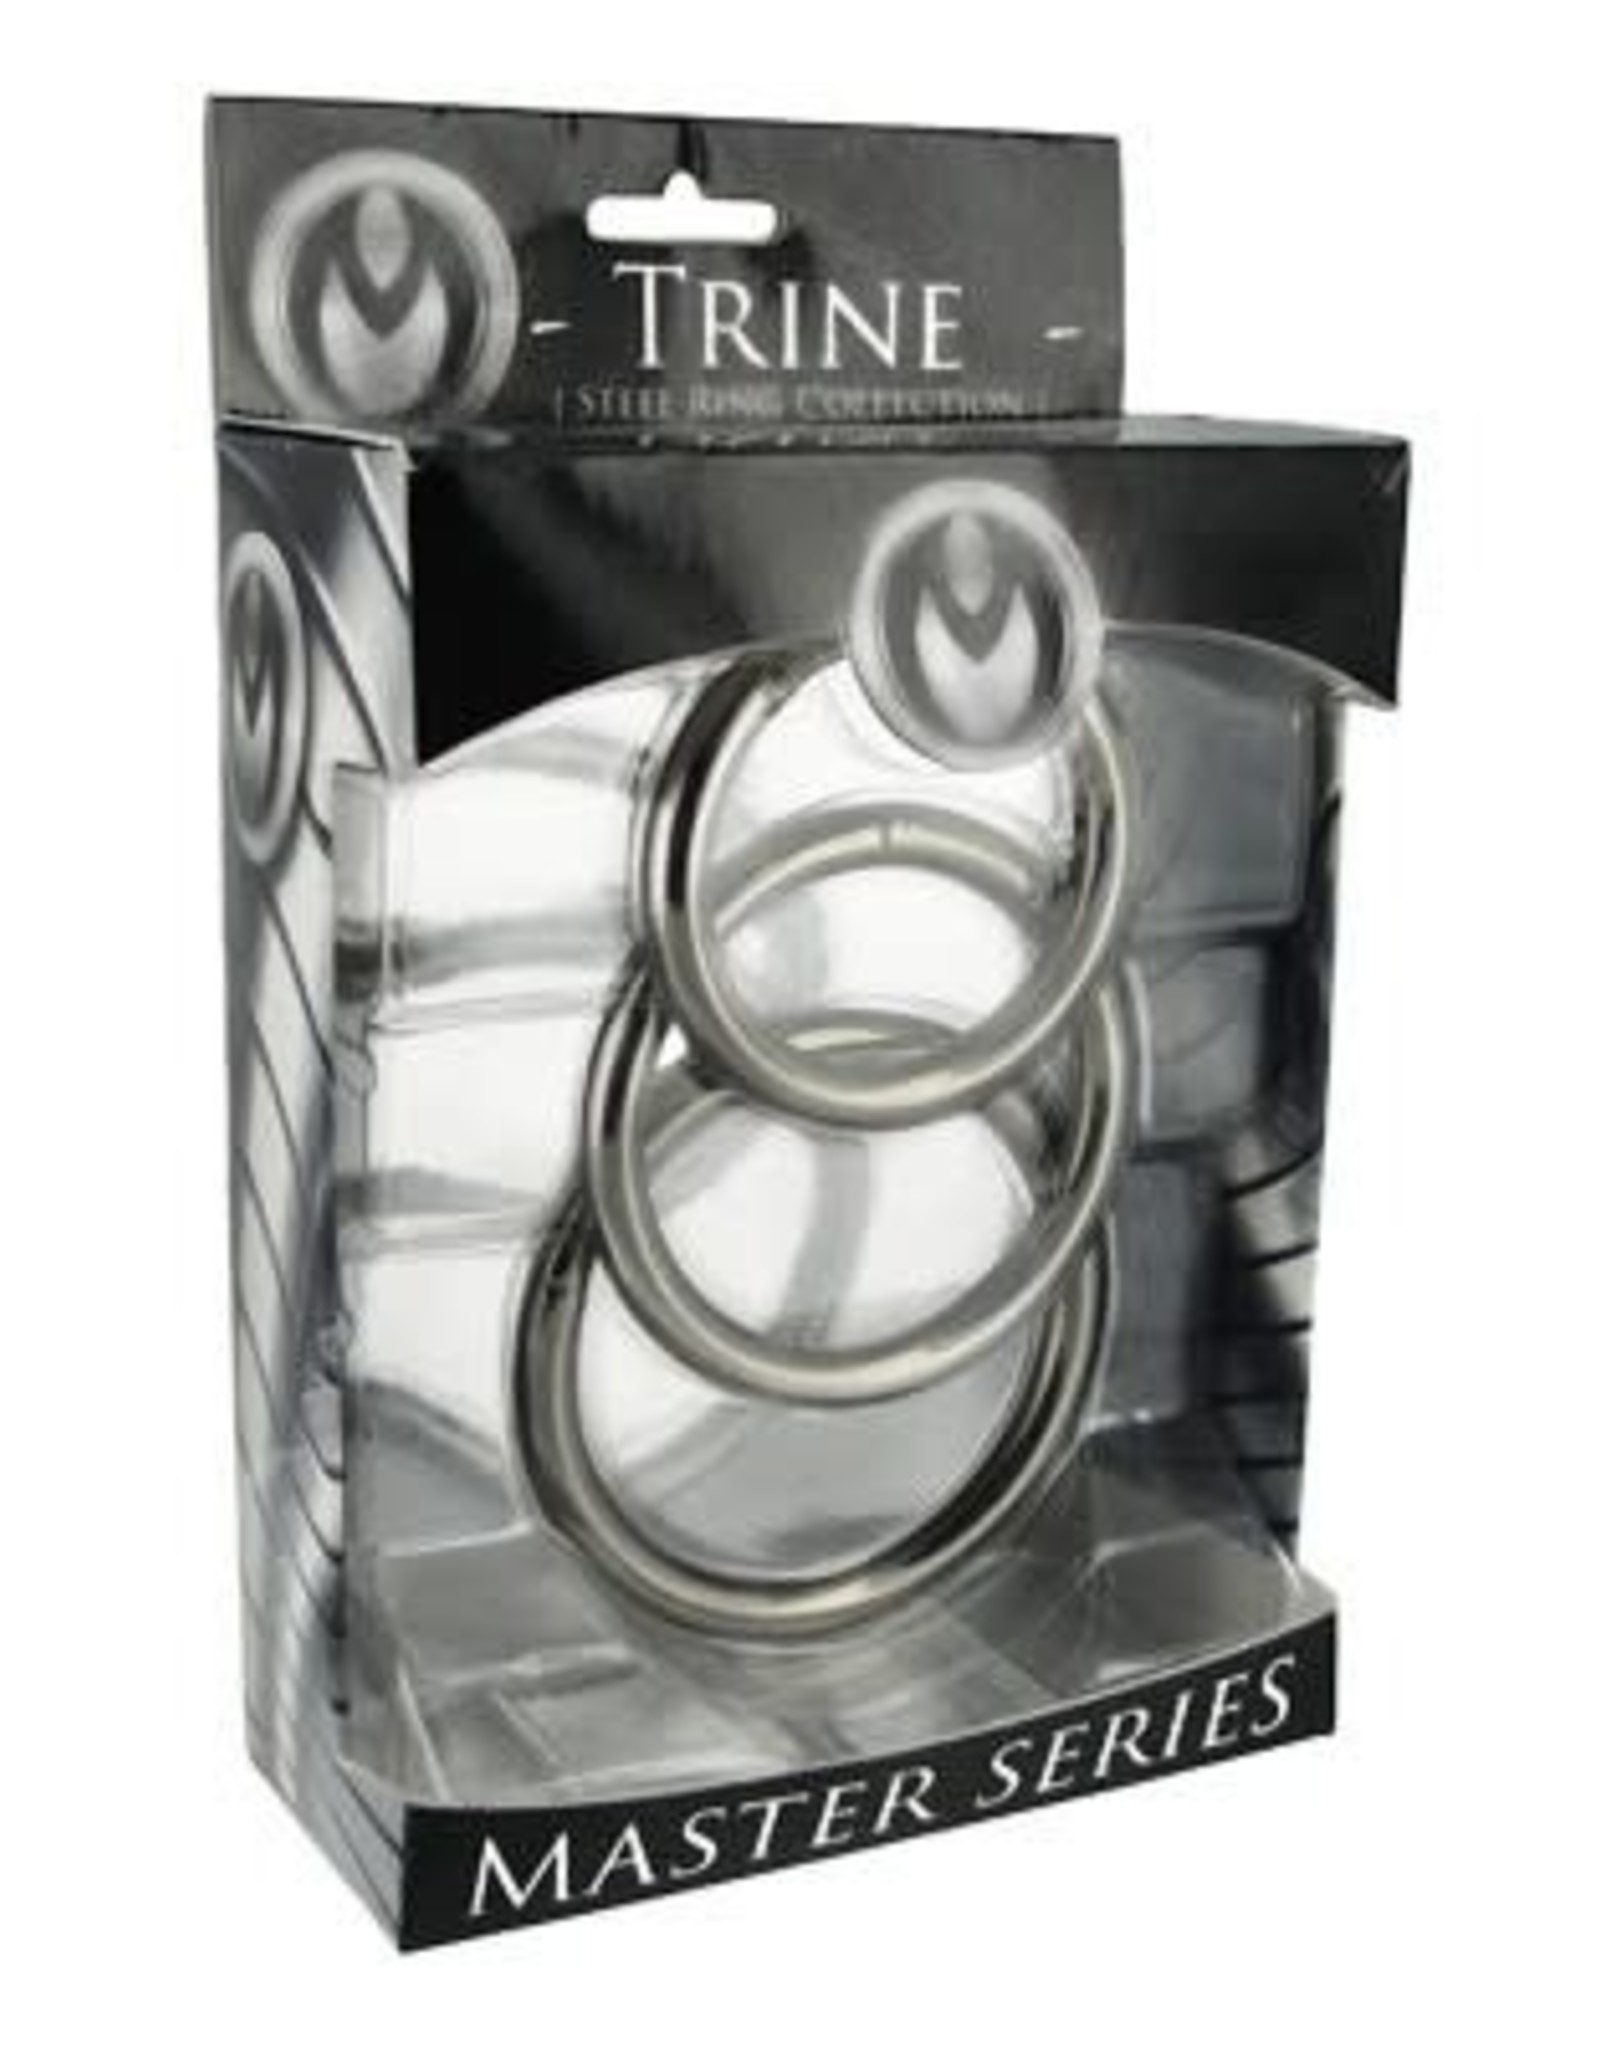 MASTER SERIES TRINE STEEL C-RING COLLECTION